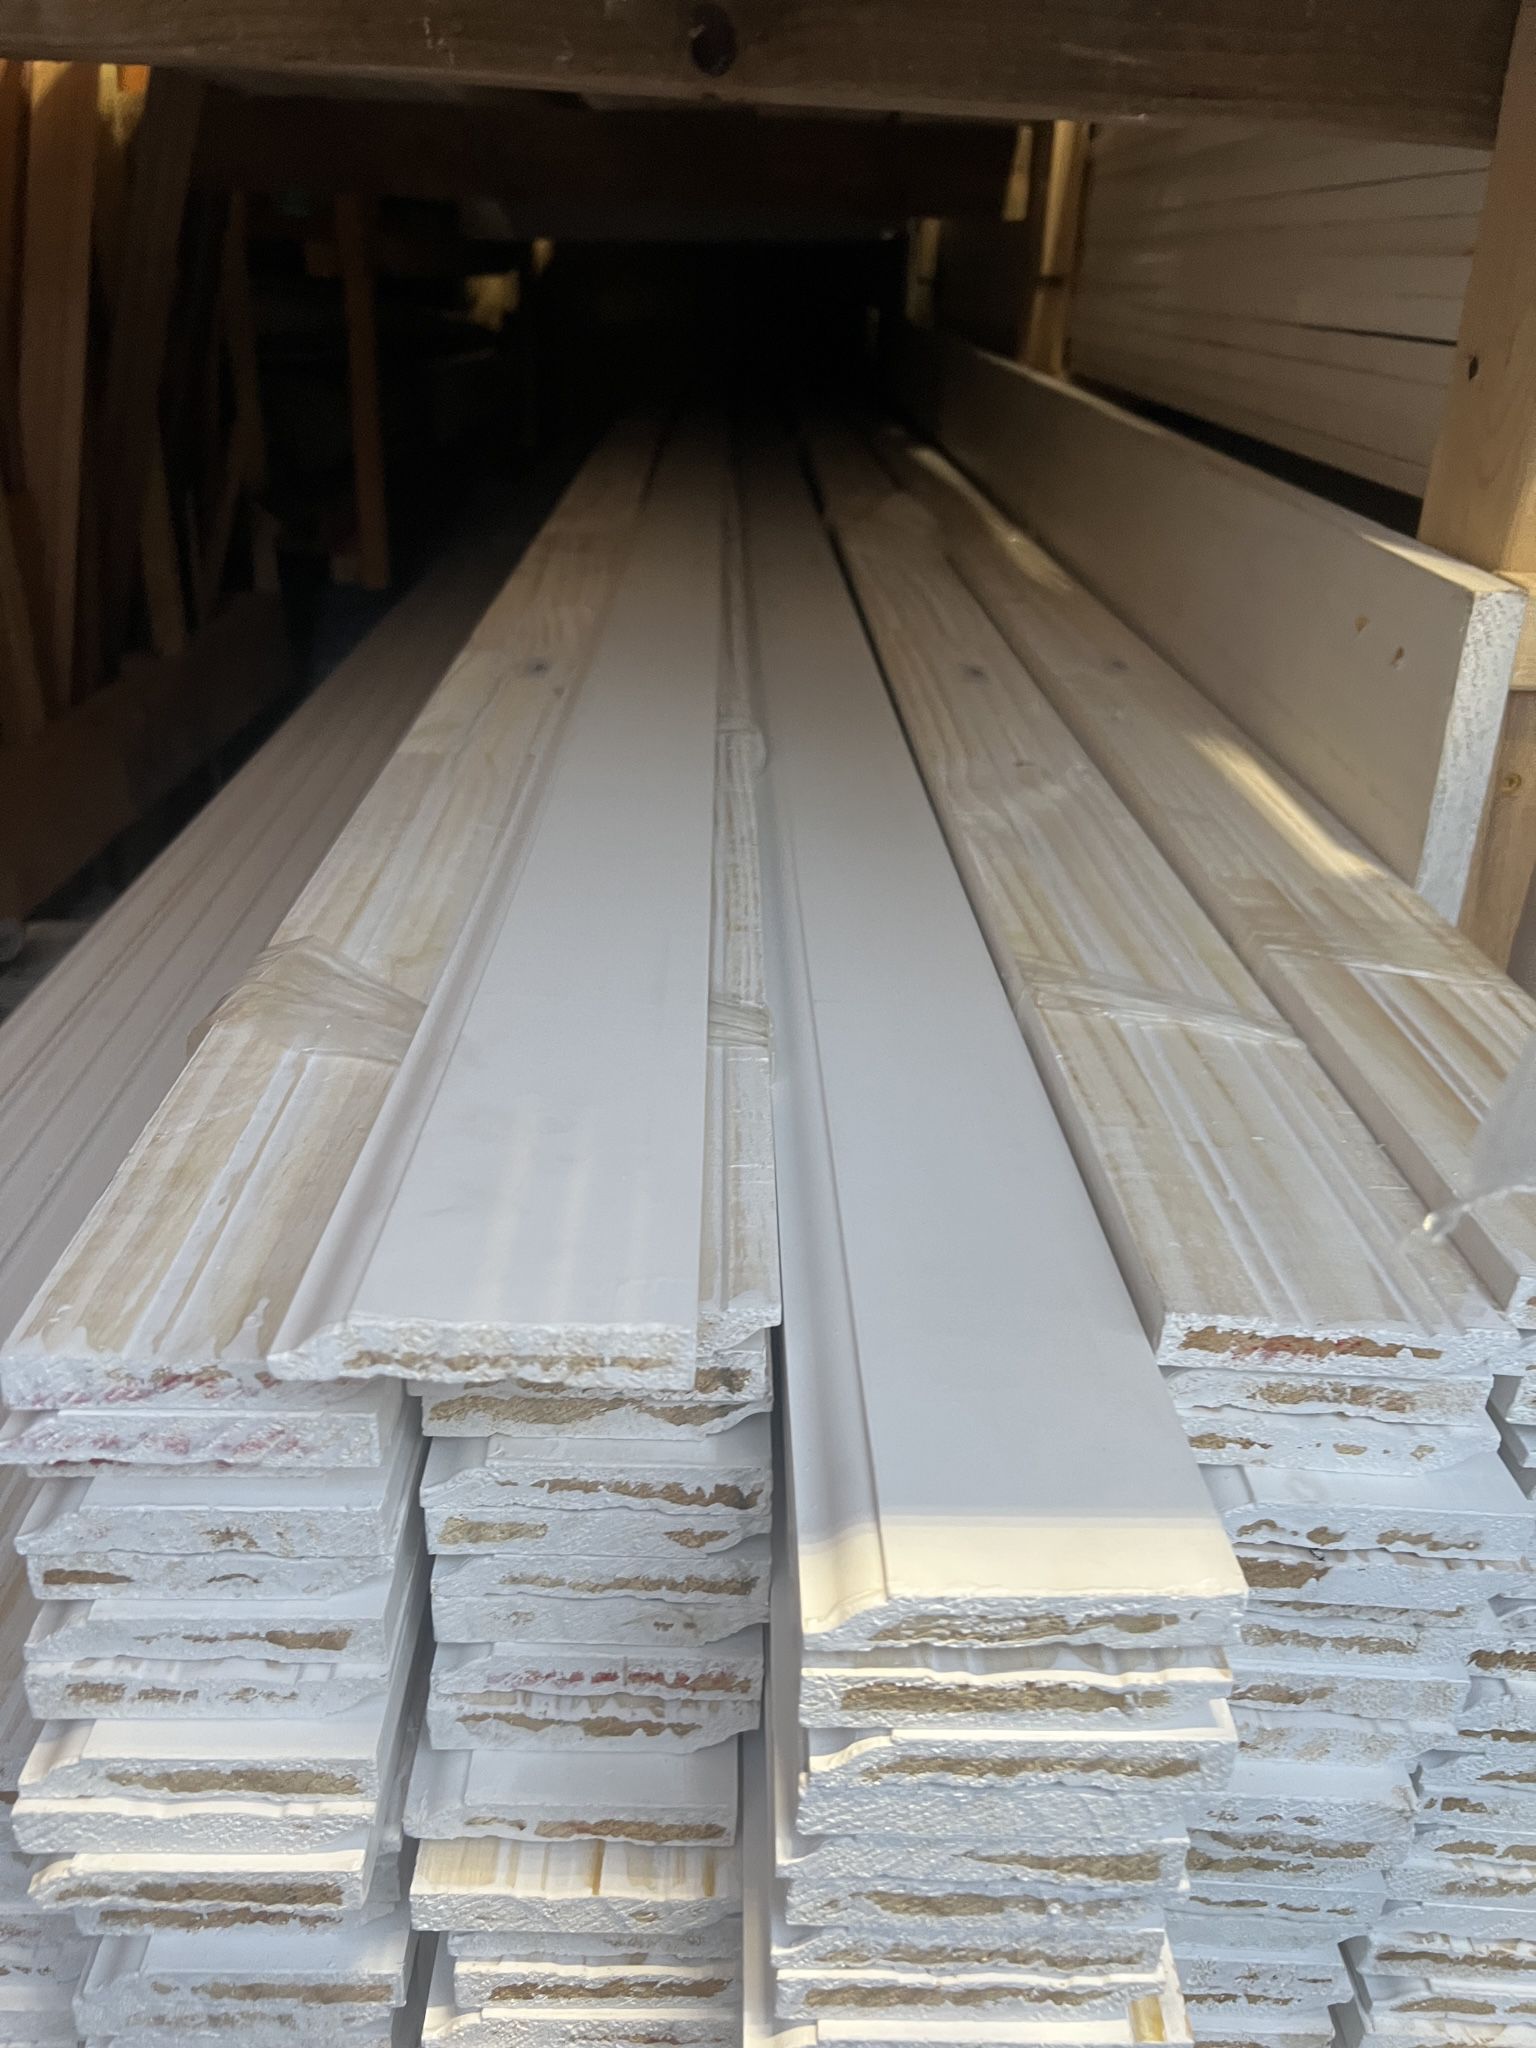 3 1/4  16  Ft Long Baseboar Price Only $1 Per Ft Price Is Firm 